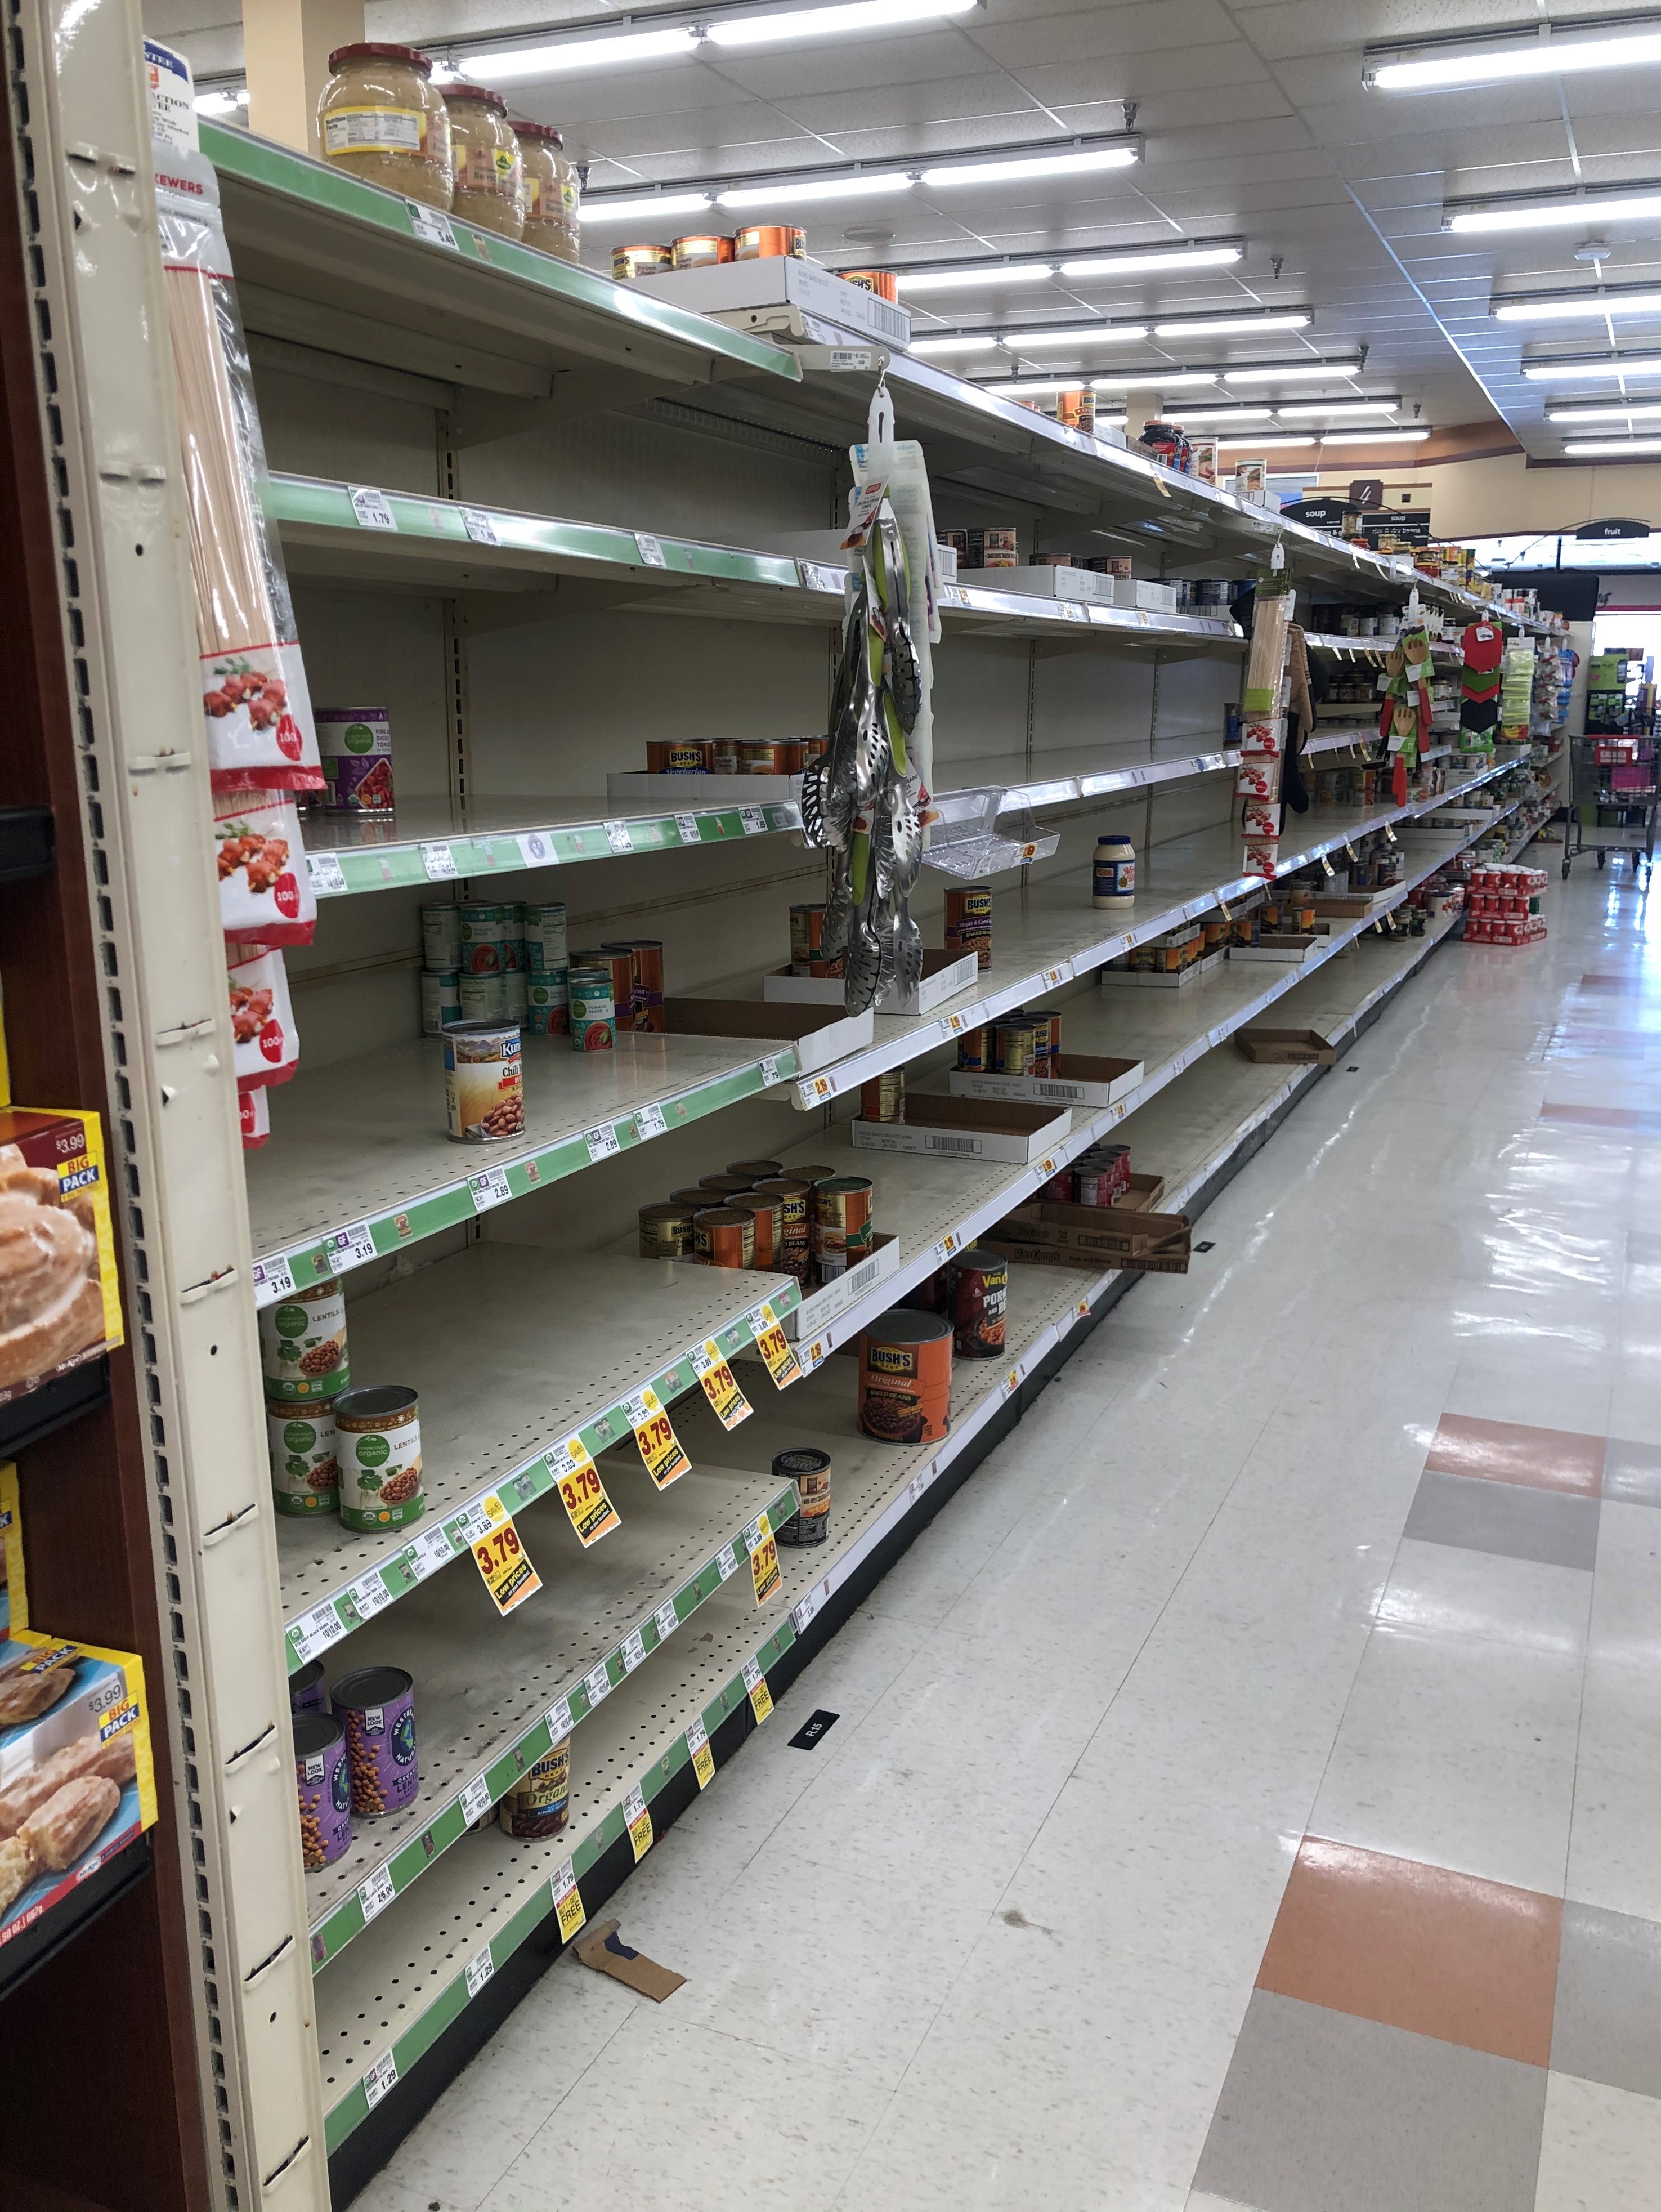 Photo of angle view of shelving down left side of canned good aisle in grocery store. Limited amount of canned beans and tomatoes are scattered throughout shelves. Shelves below "fruit" sign at opposite end of aisle appear to be more fully stocked. Shopping cart sits at far end of aisle.